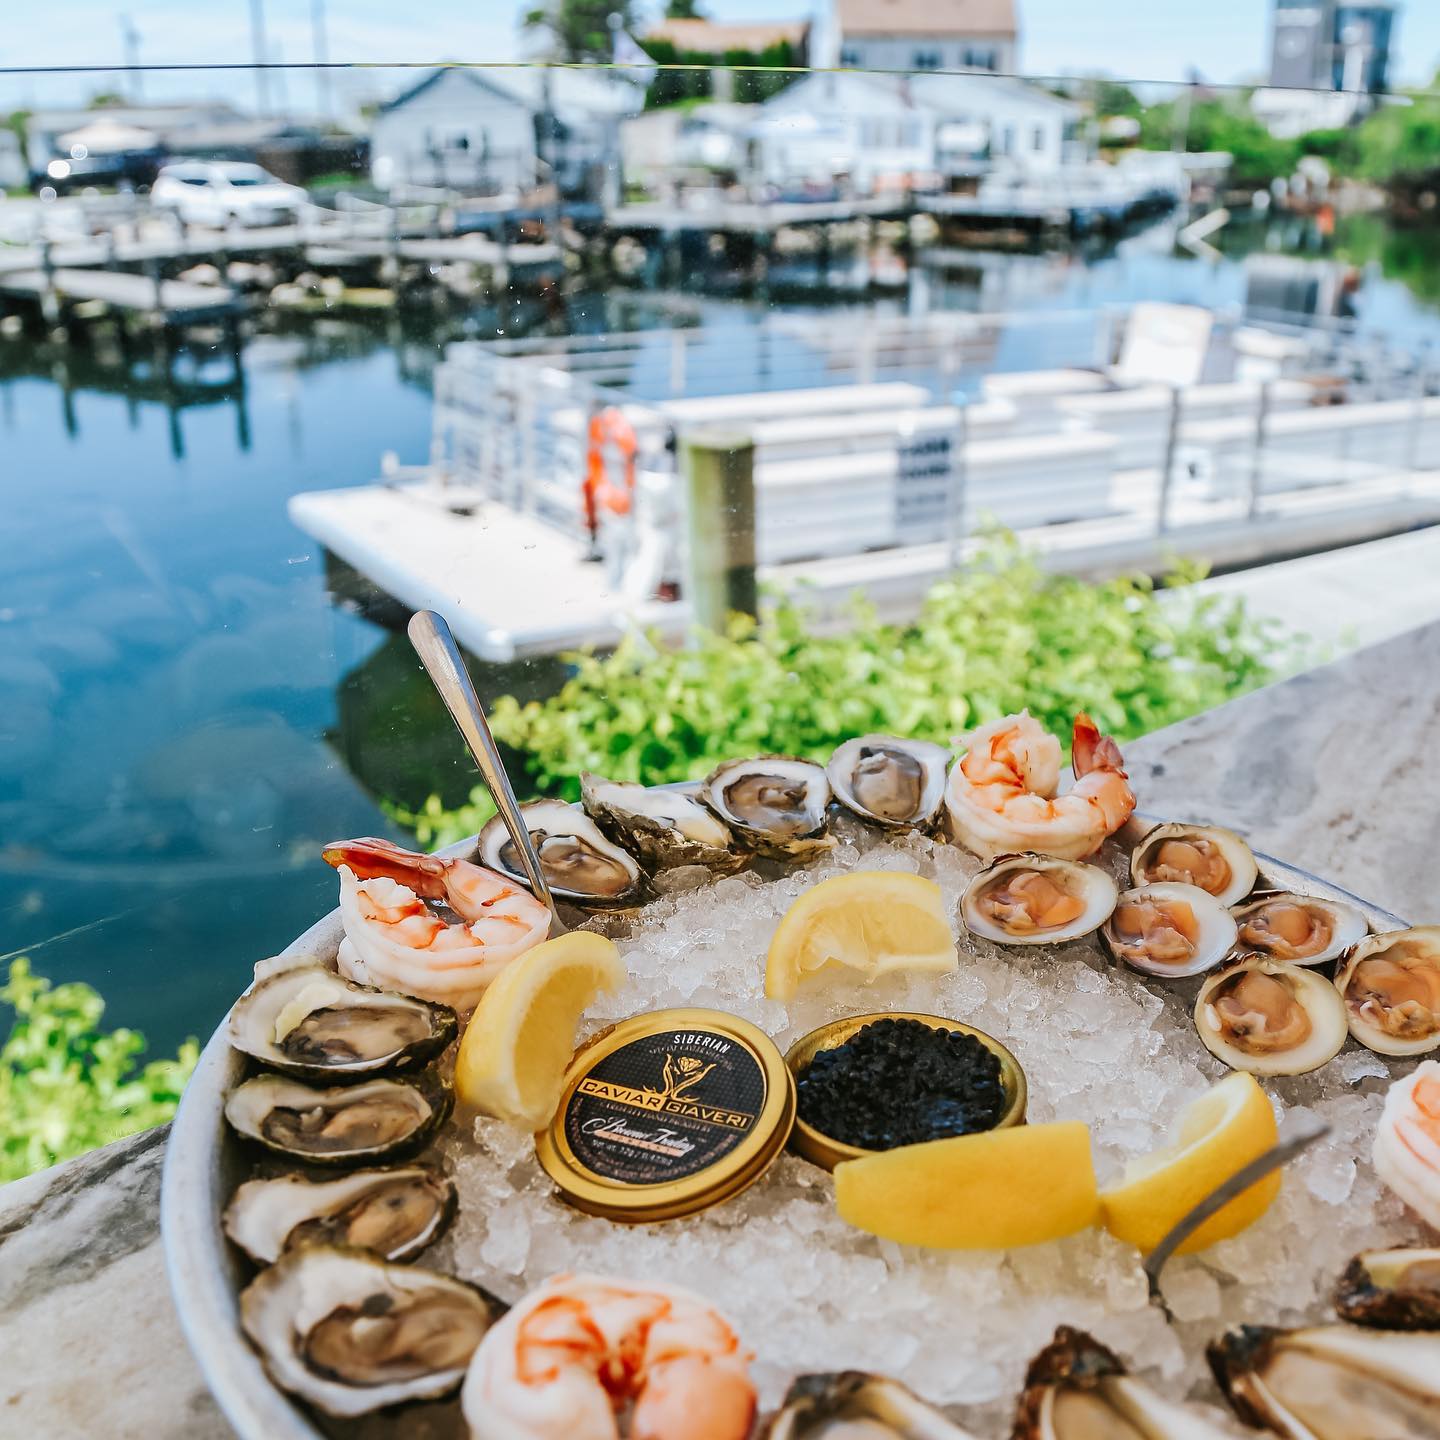 Raw bar offerings with a water view